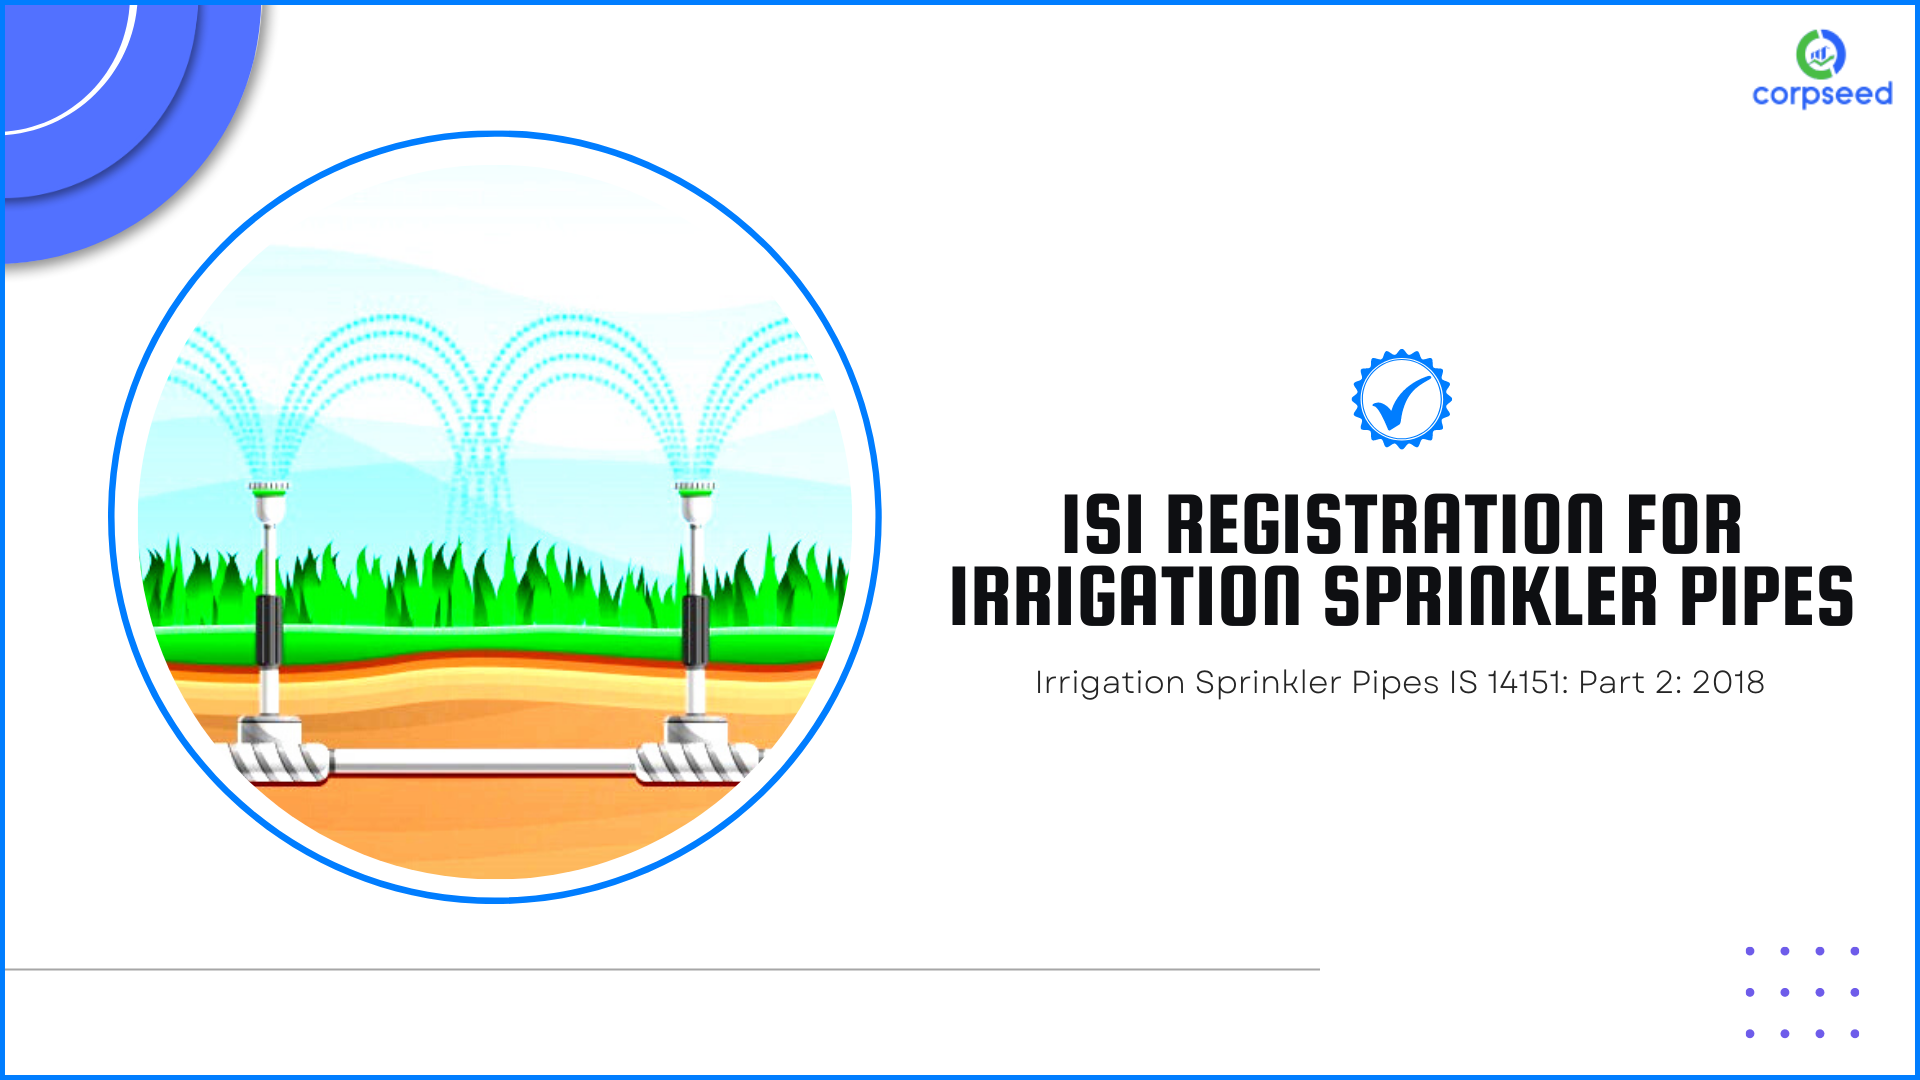 isi-registration-for-irrigation-sprinkler-pipes-is-14151-part-2-2018_corpseed.png